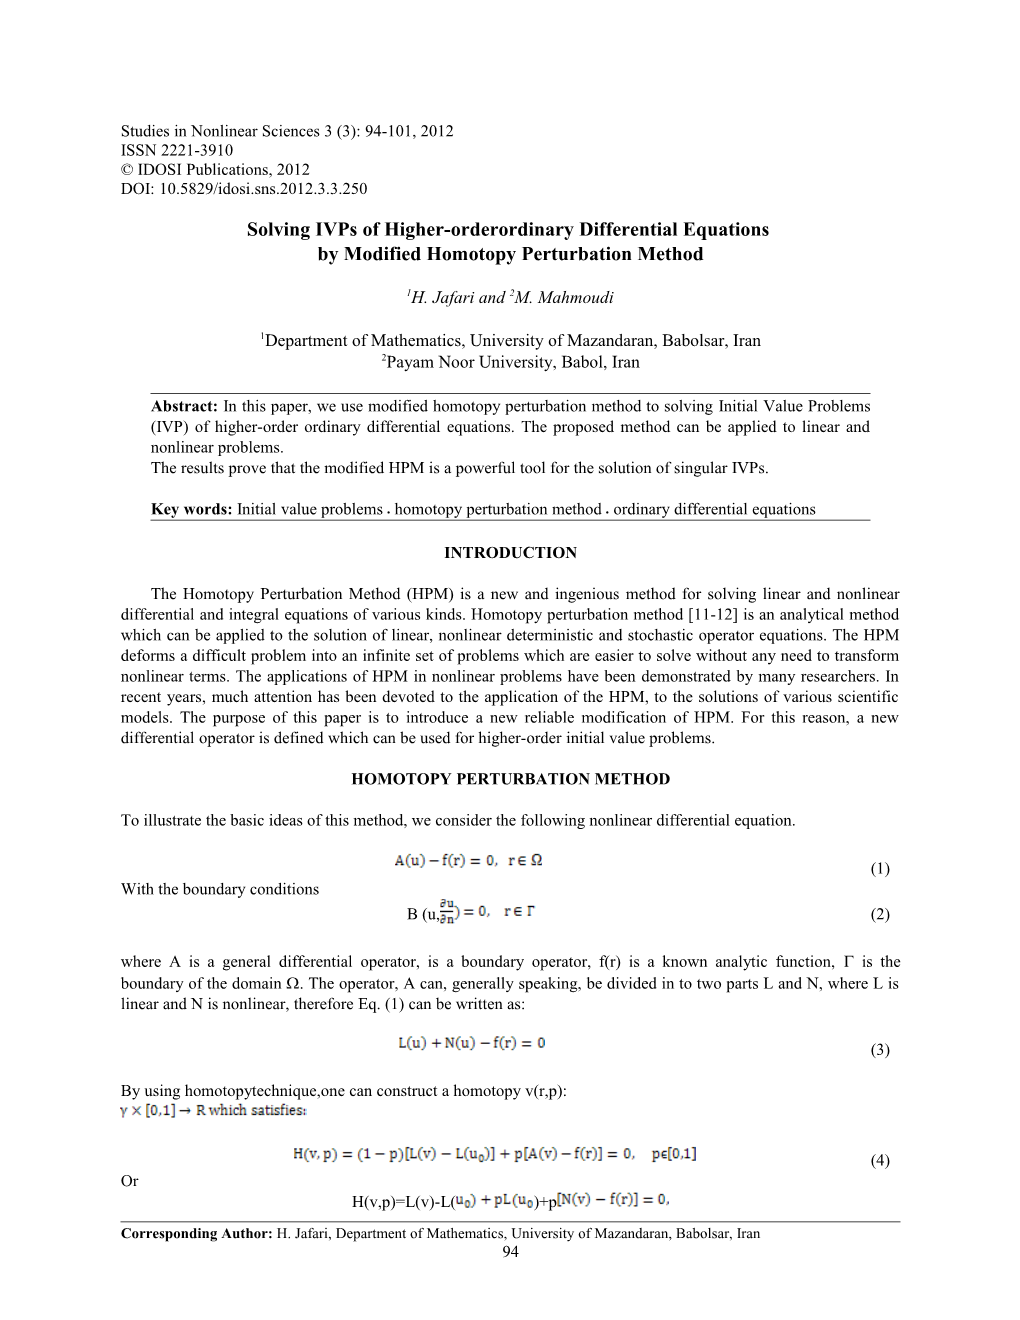 Solving Ivps of Higher-Order Ordinary Differential Equations